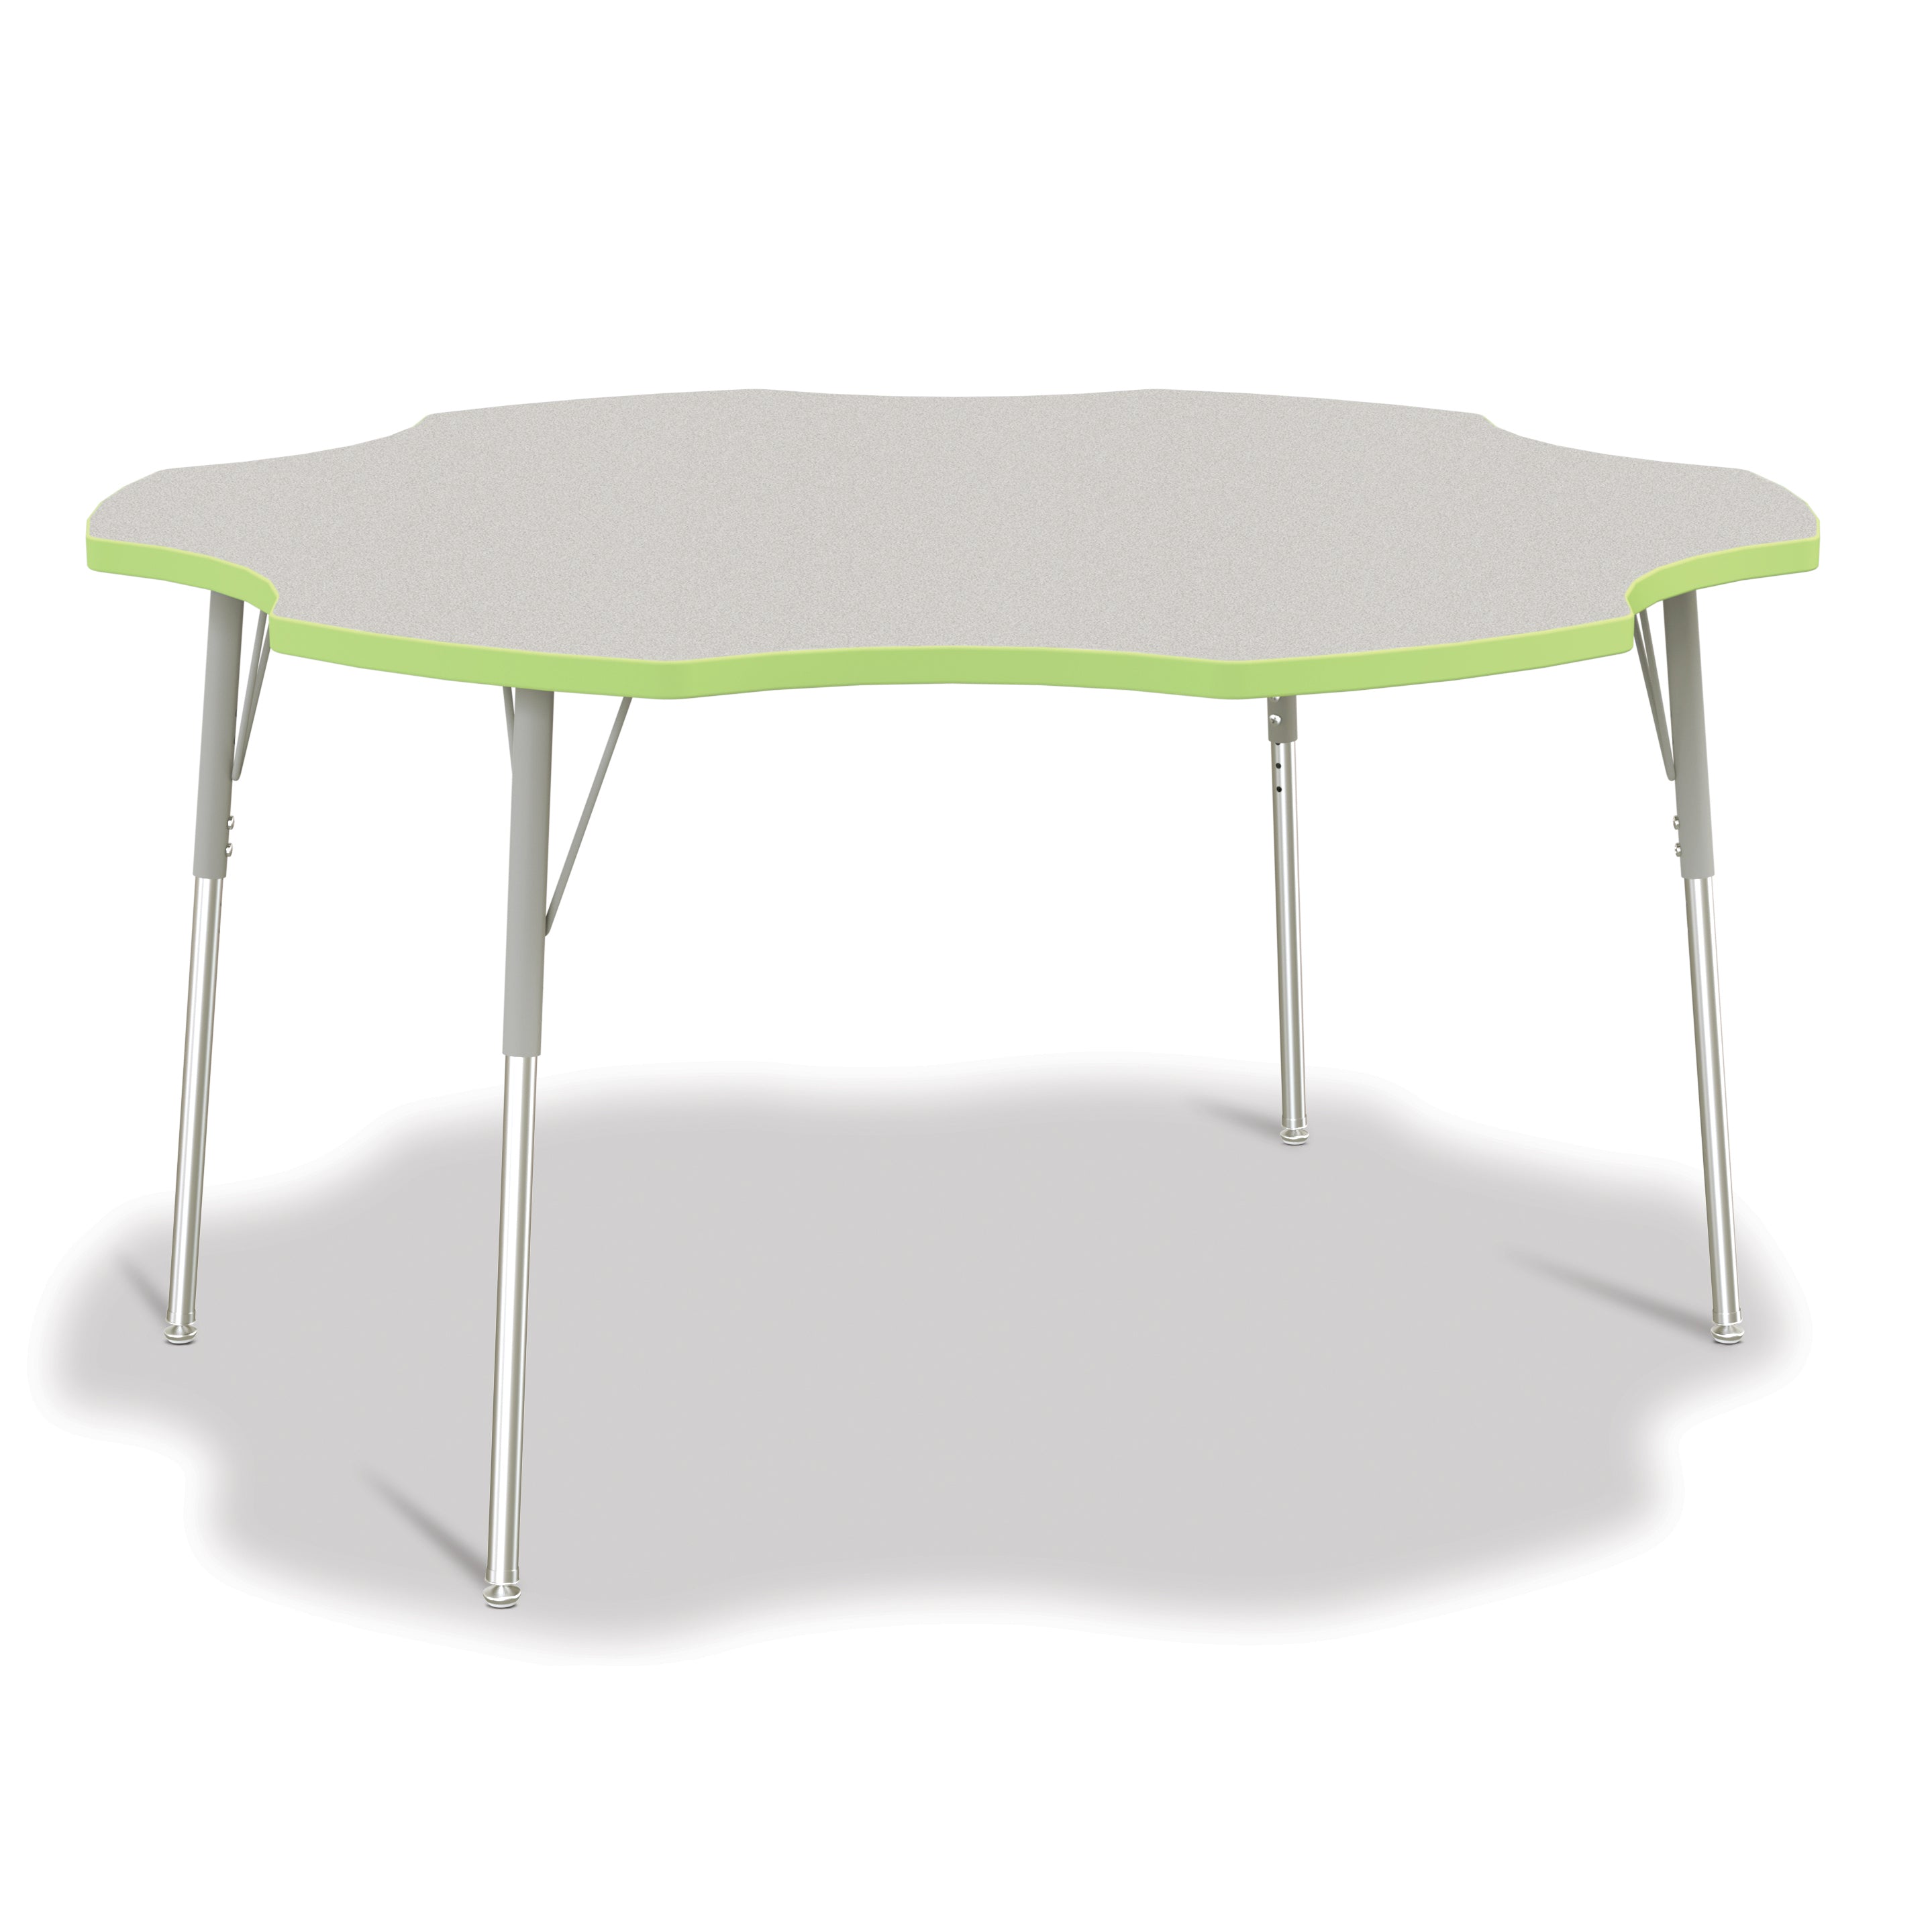 6458JCA130, Berries Six Leaf Activity Table - 60", A-height - Freckled Gray/Key Lime/Gray